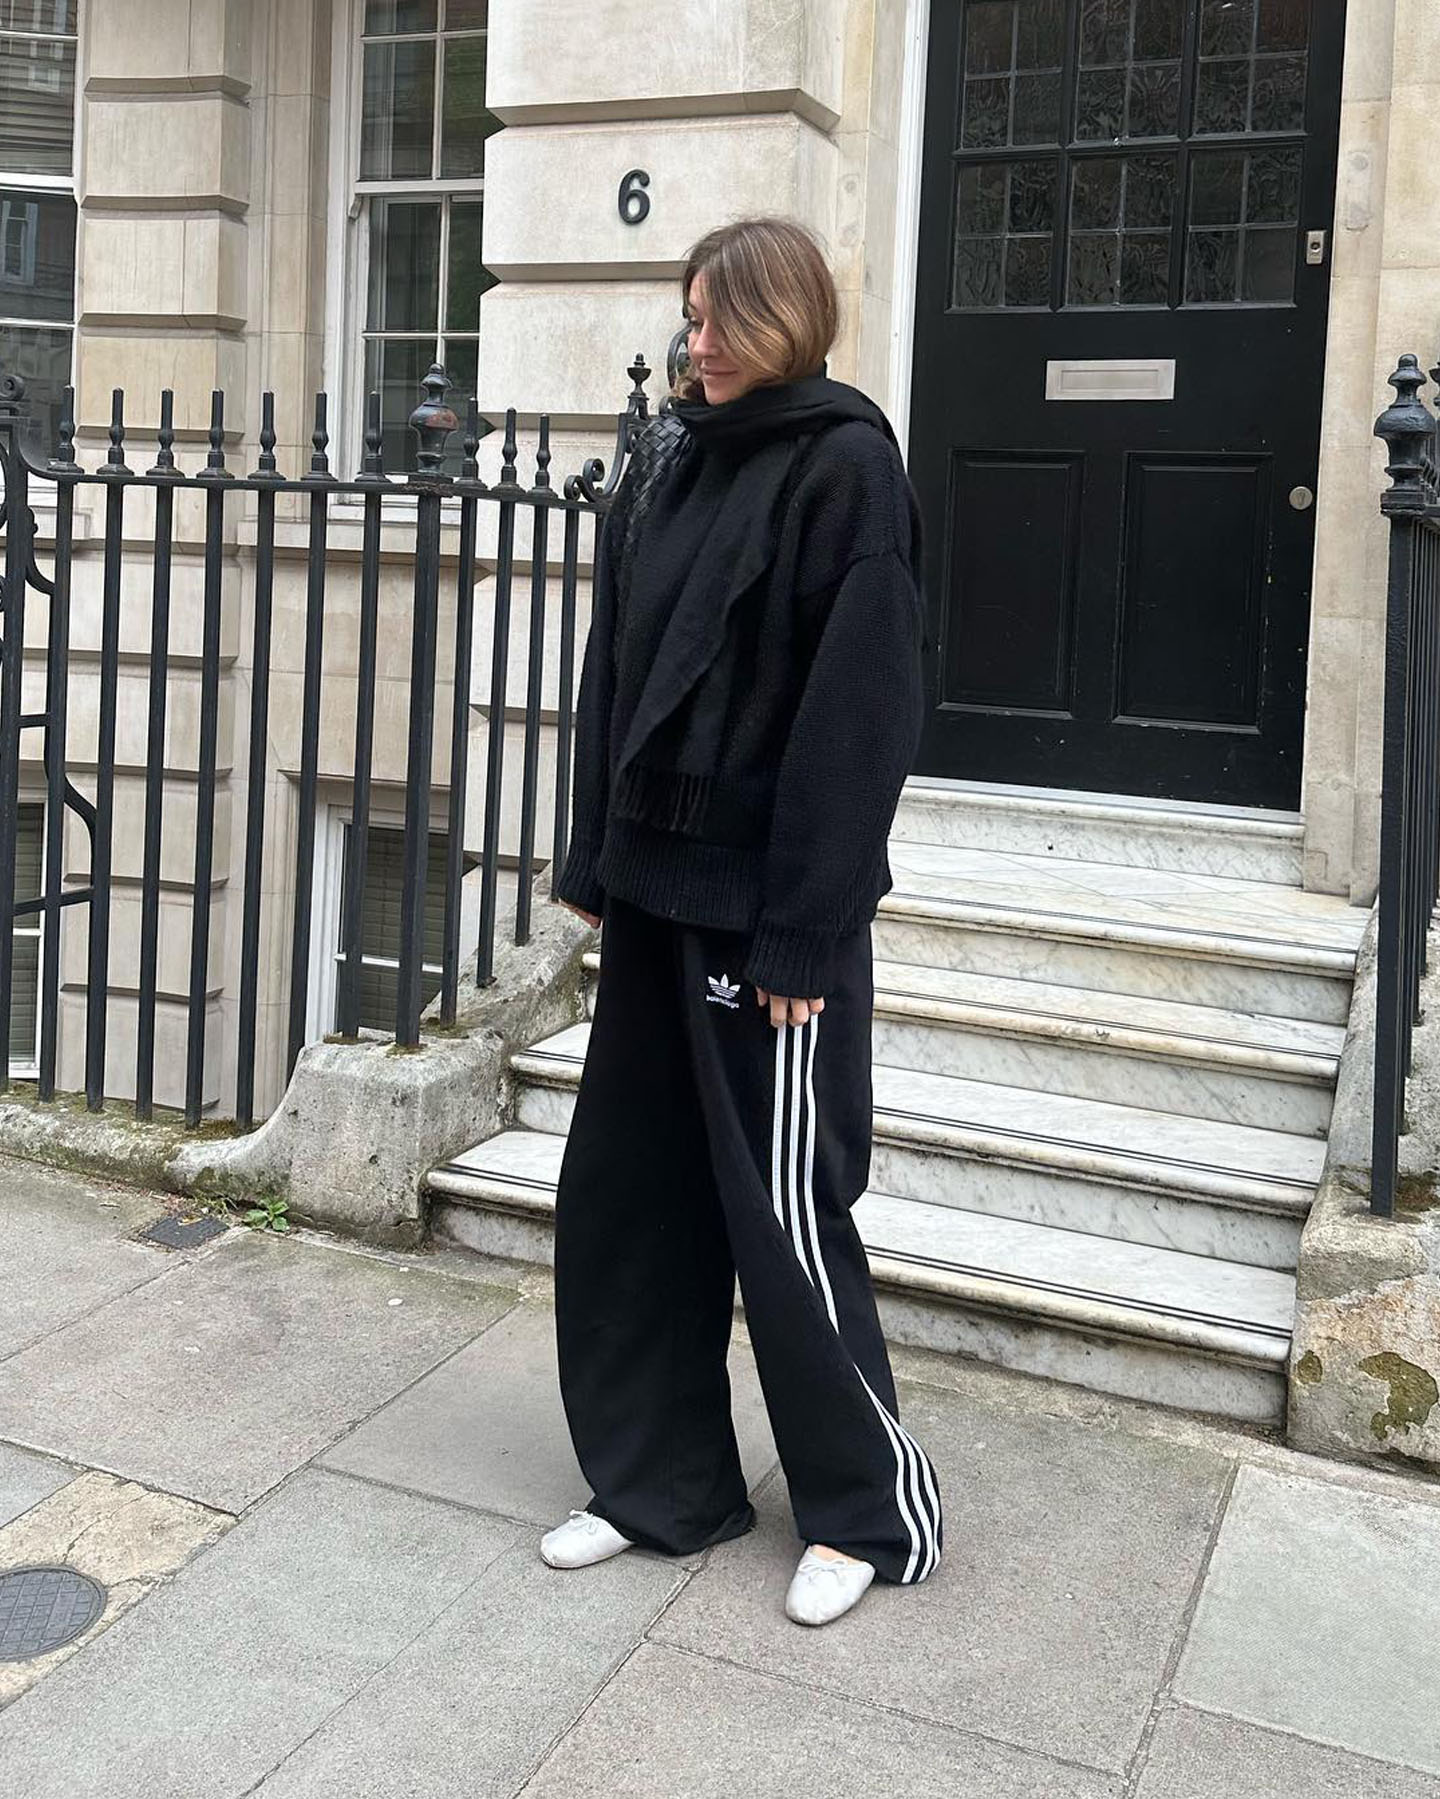 fashion influencer Camille Charriere poses on the street in an all-black outfit with a scarf, coat, Adidas track pants, and white Miu Miu ballet flats